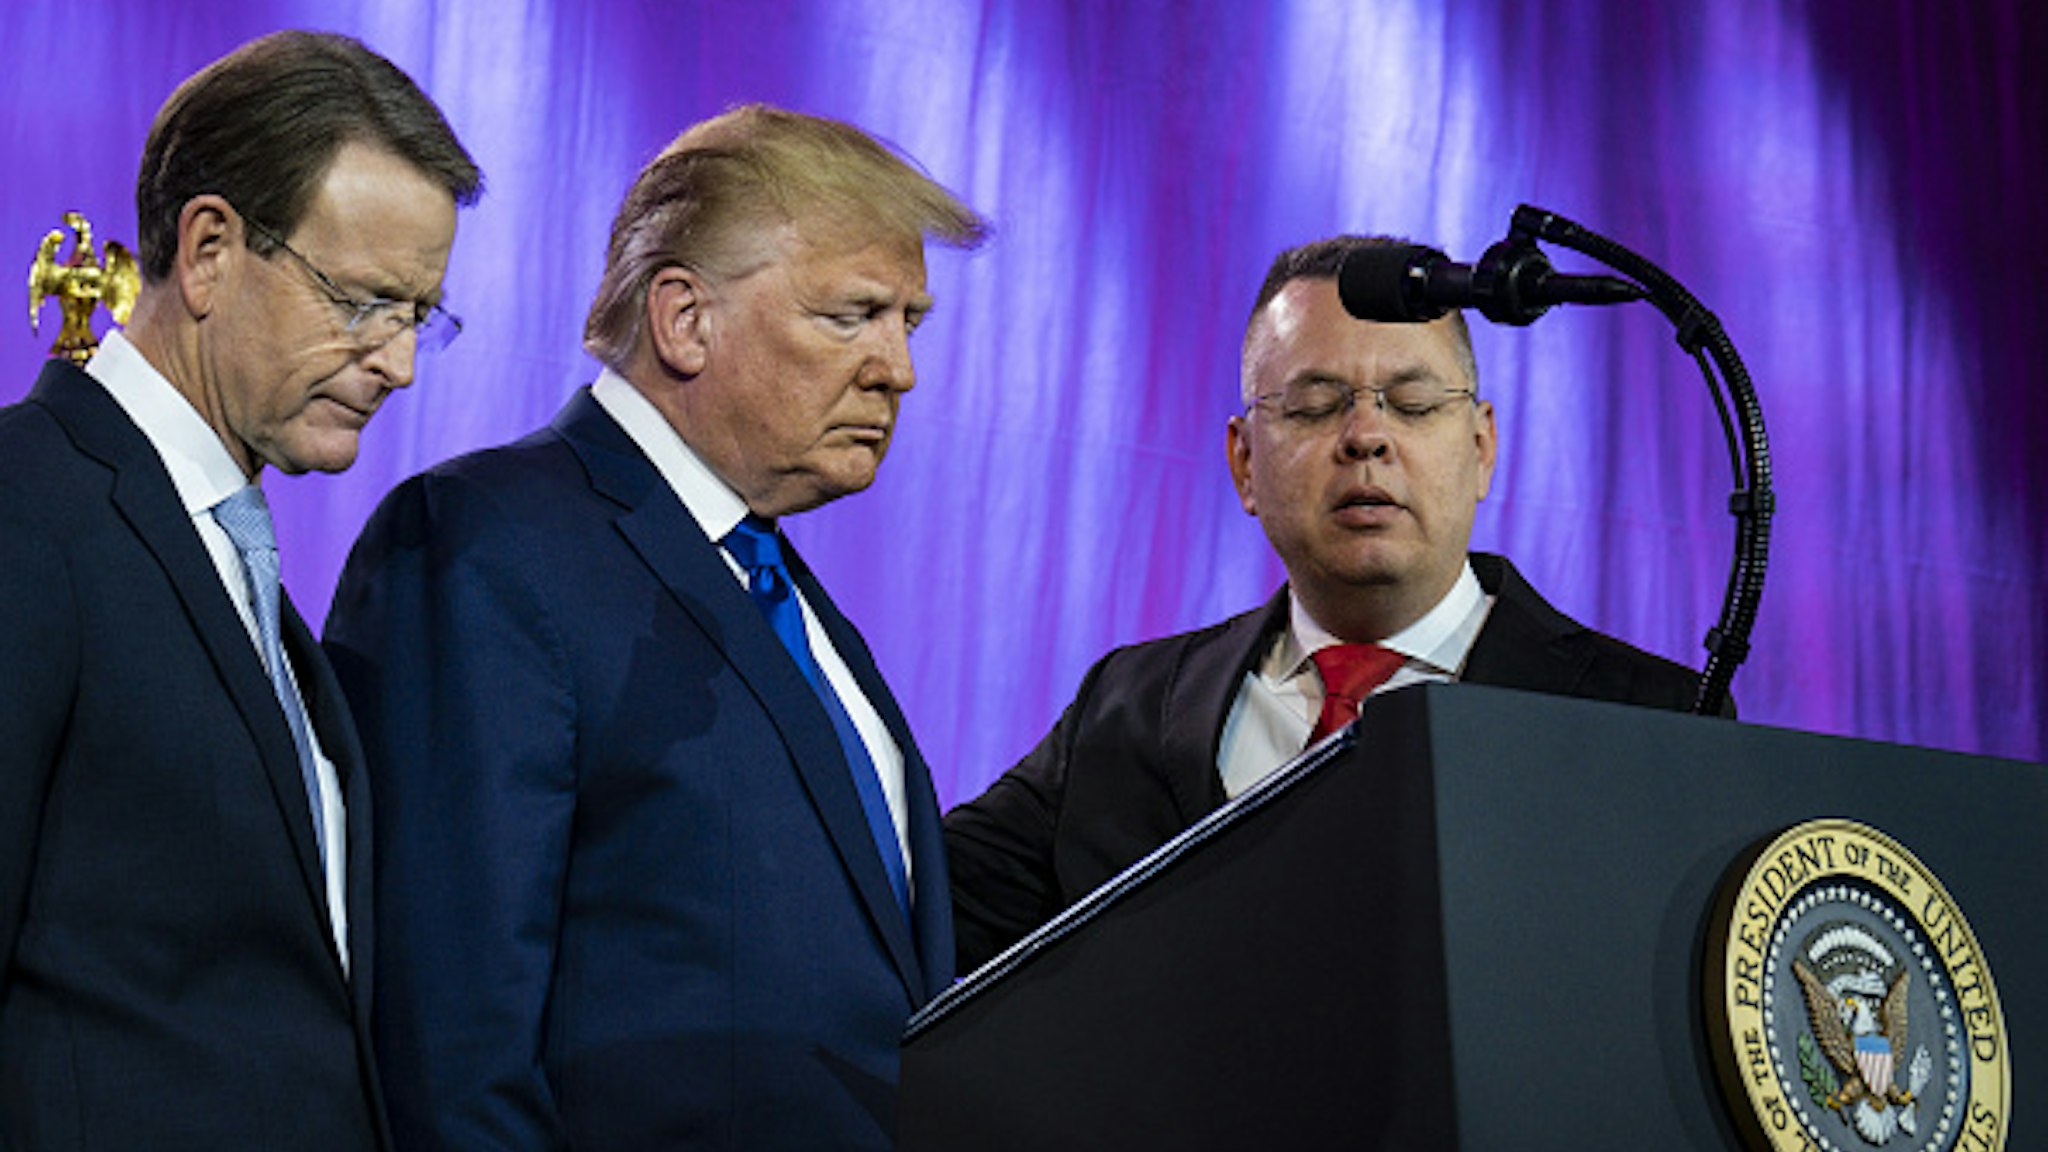 U.S. President Donald Trump, center, prays with Tony Perkins, president of the Family Research Council, left, and Pastor Andrew Brunson at the Values Voter Summit at the Omni Shoreham Hotel in Washington, D.C., U.S., on Saturday, Oct. 12, 2019. Trump is the target of an impeachment inquiry on Capitol Hill, evangelical Christians who gathered across town were unfazed by his request of Ukraine to investigate political rival Joe Biden.